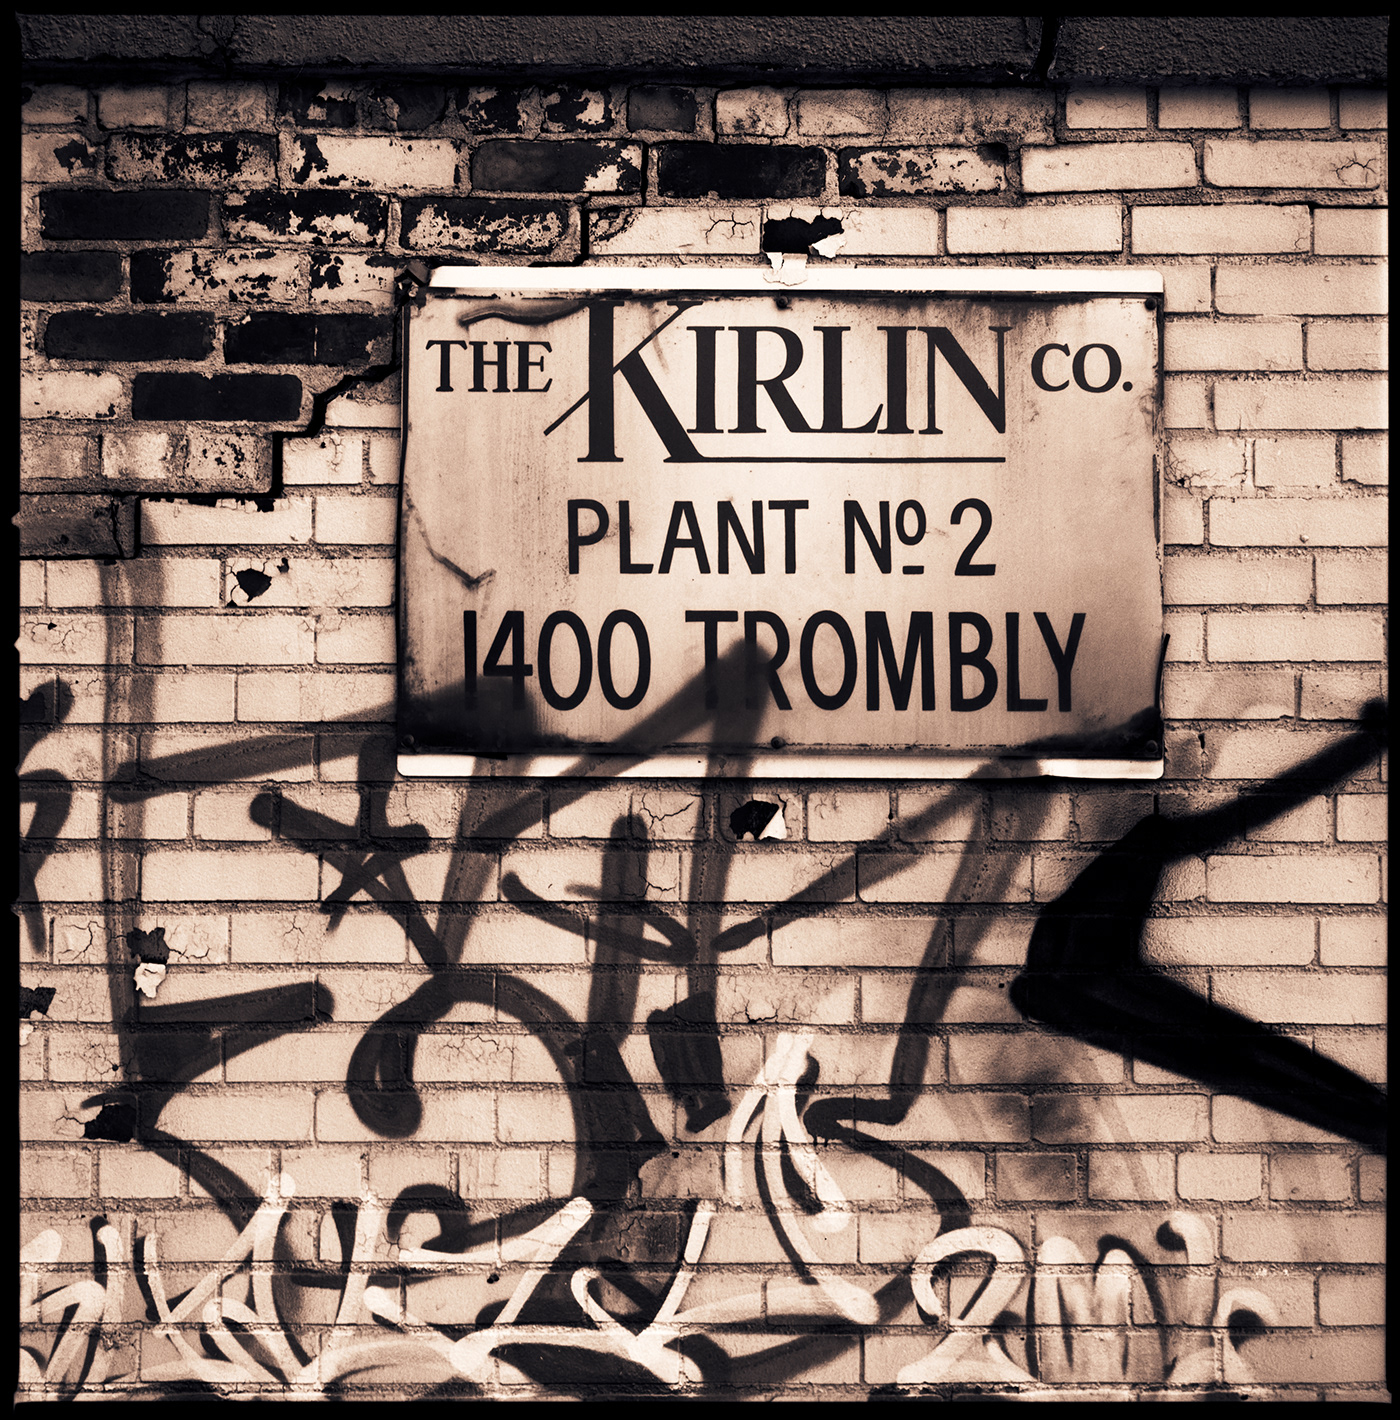 The Kirlin Co. sign on a wall with graffiti, in Detroit, Michigan.